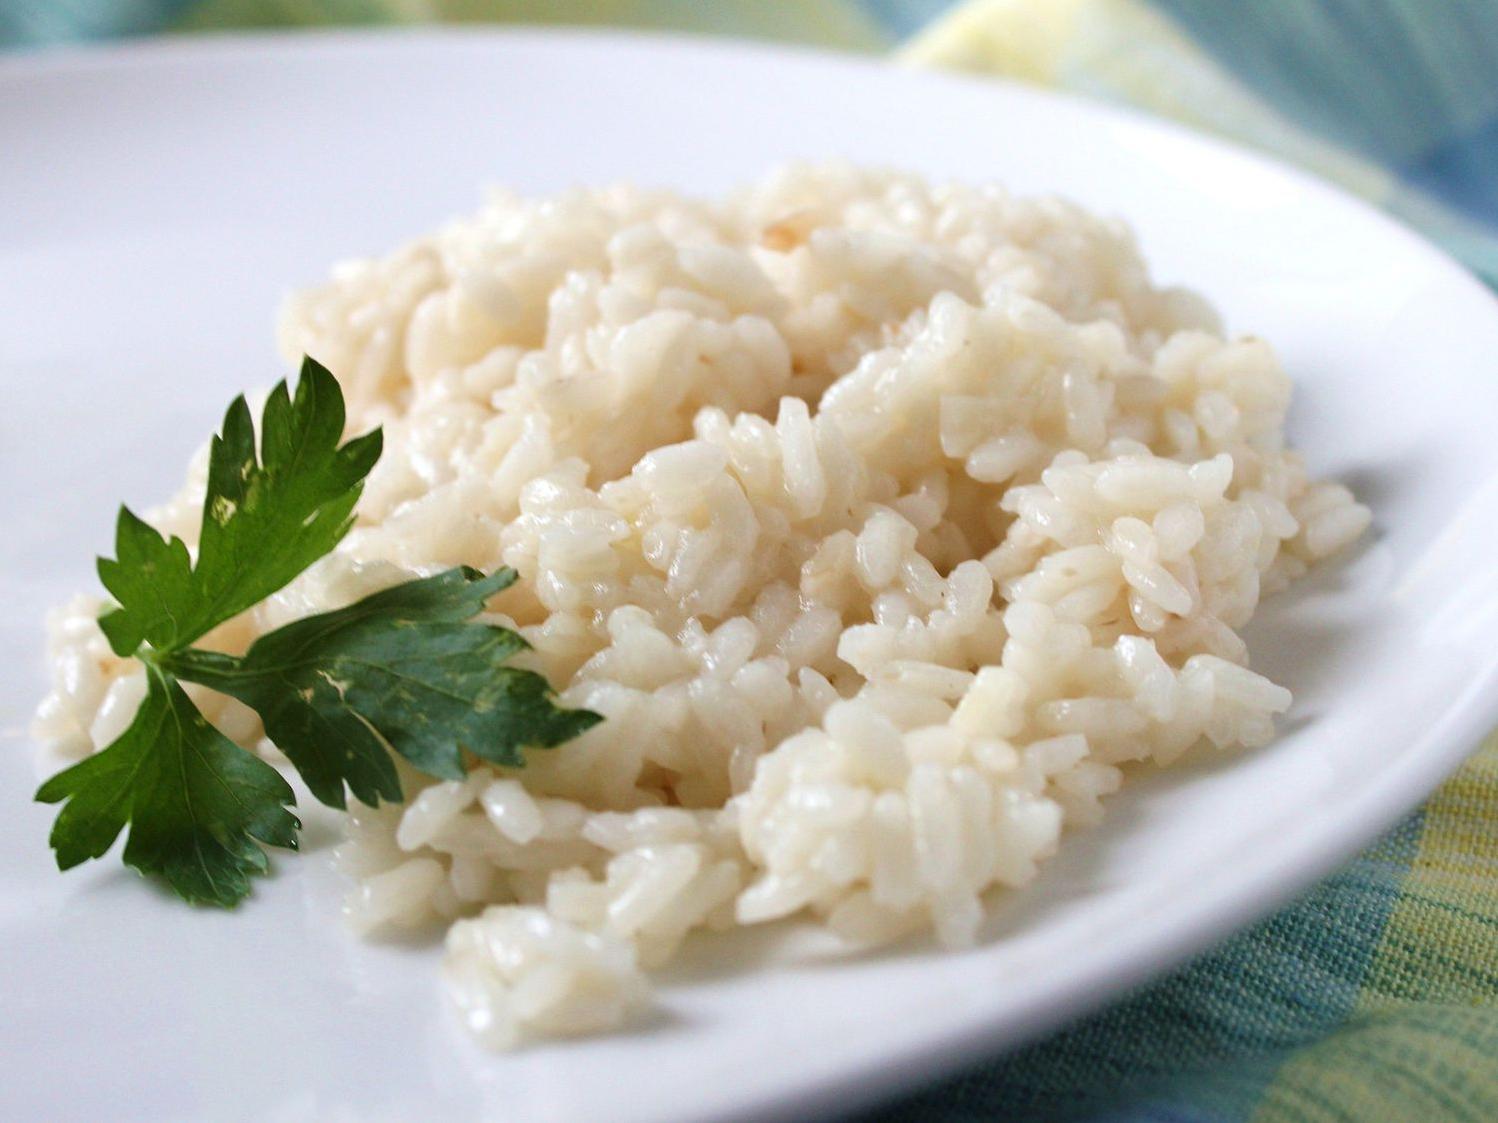  A bowl of perfectly cooked Brazilian white rice, the staple of every Brazilian meal